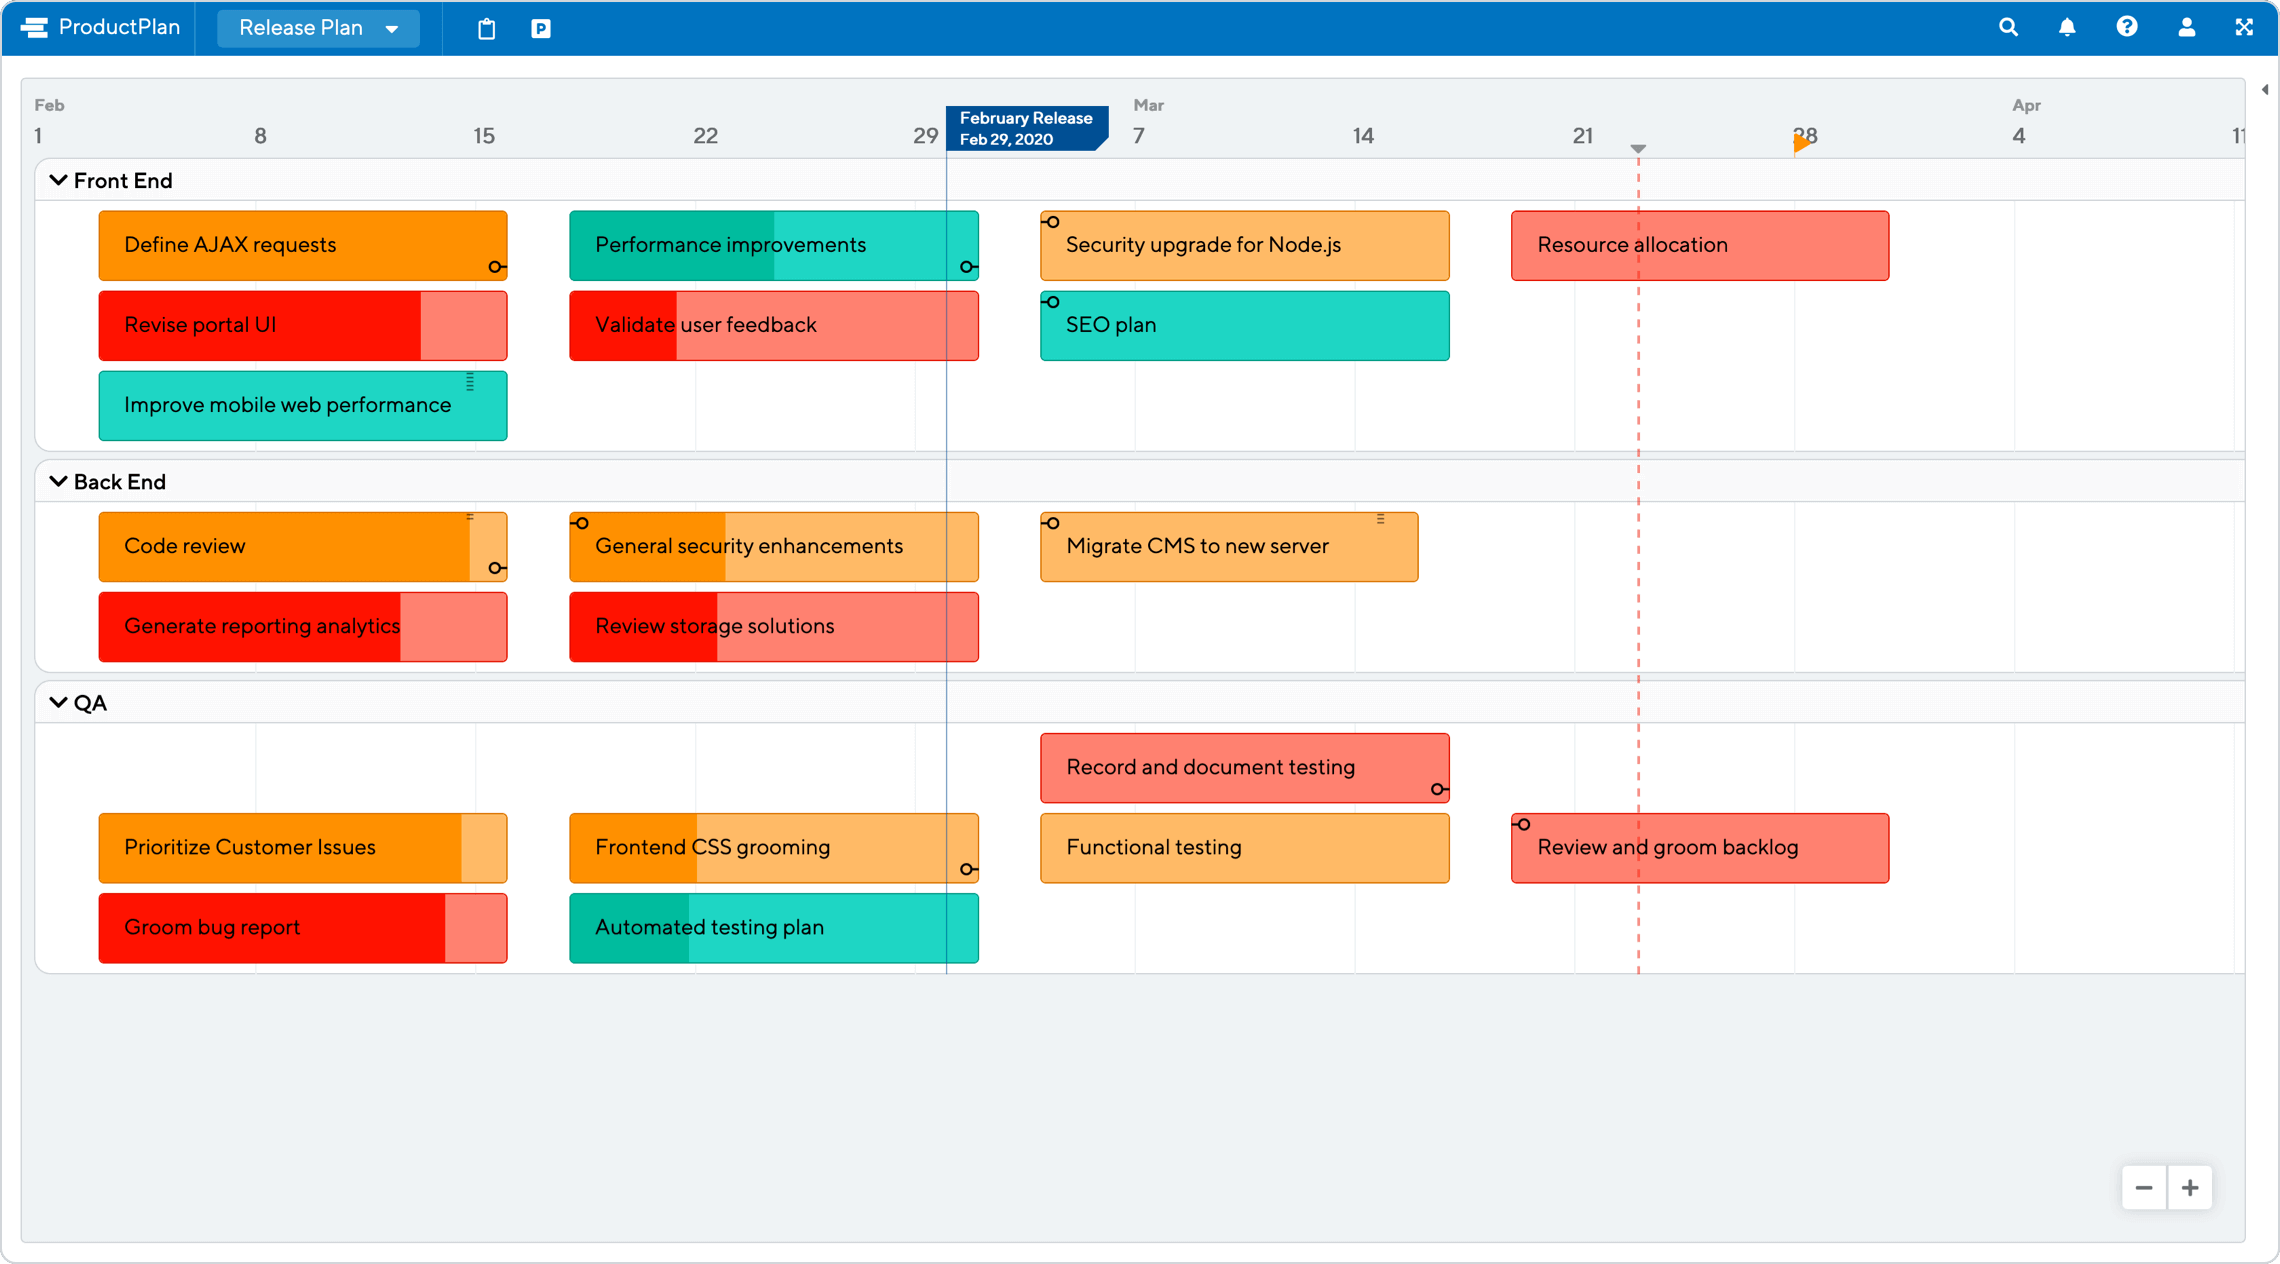 Release Plan Template by ProductPlan